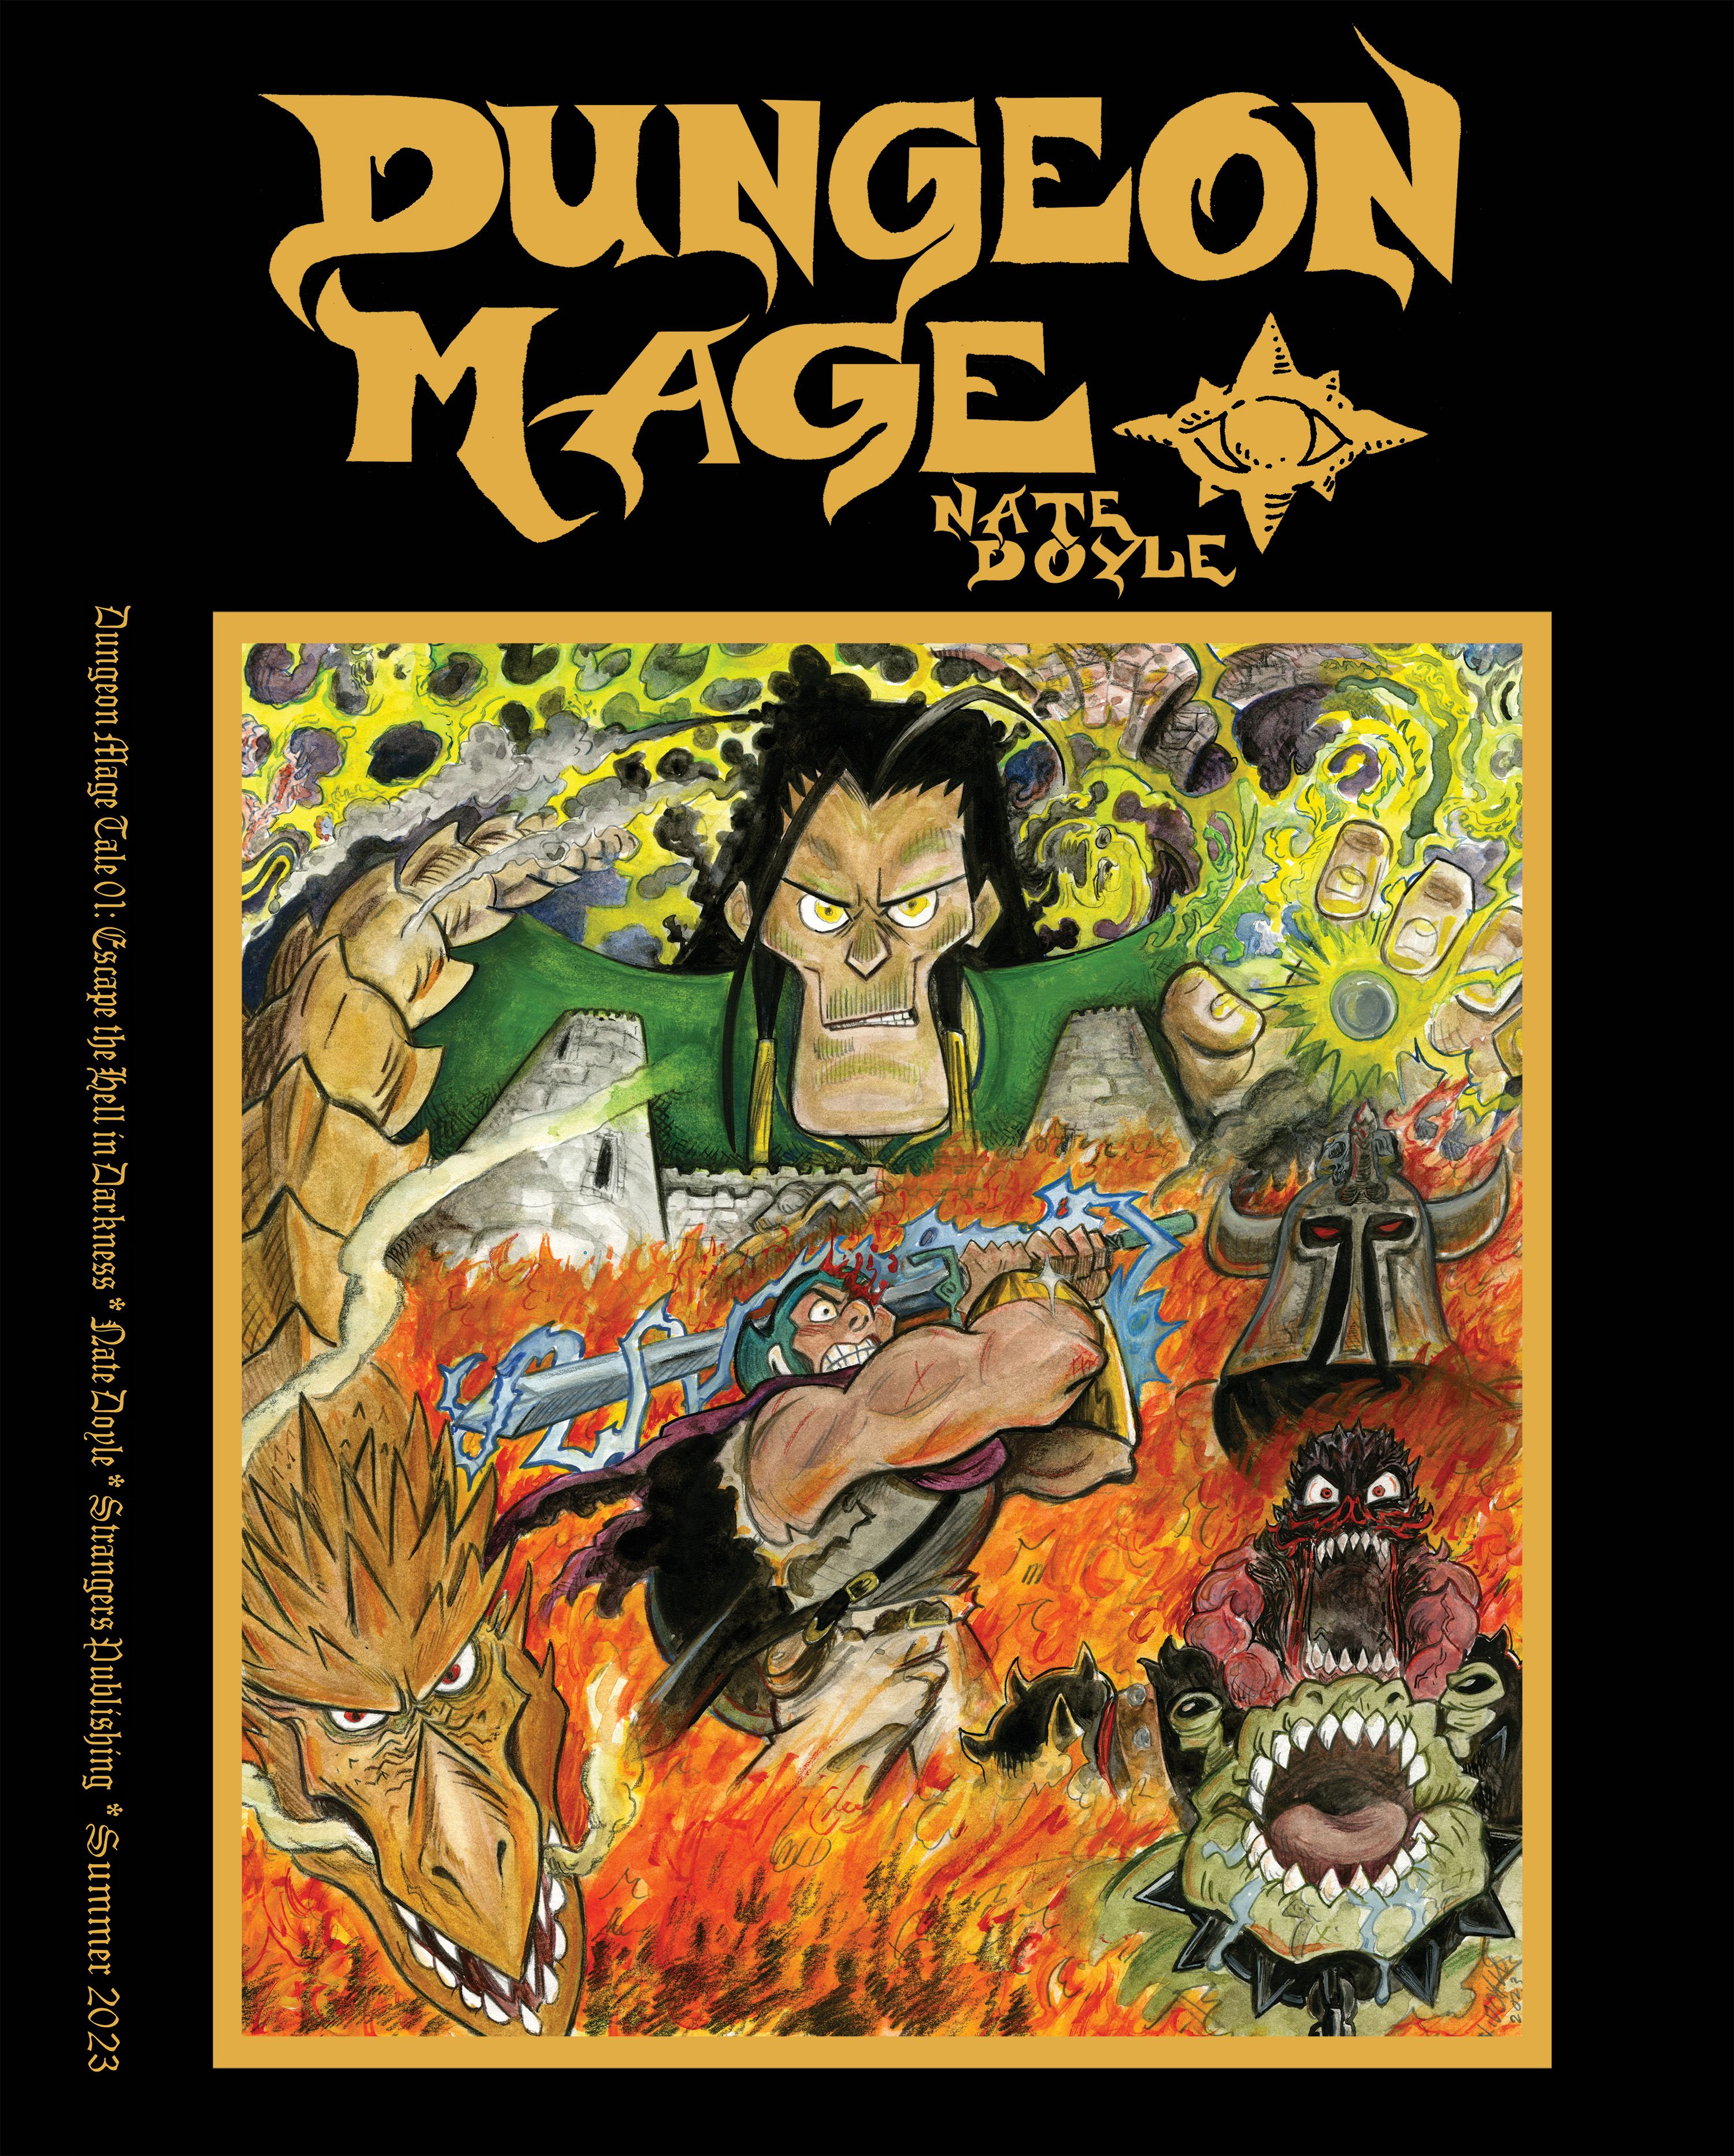 Dungeon Mage #1 Comic